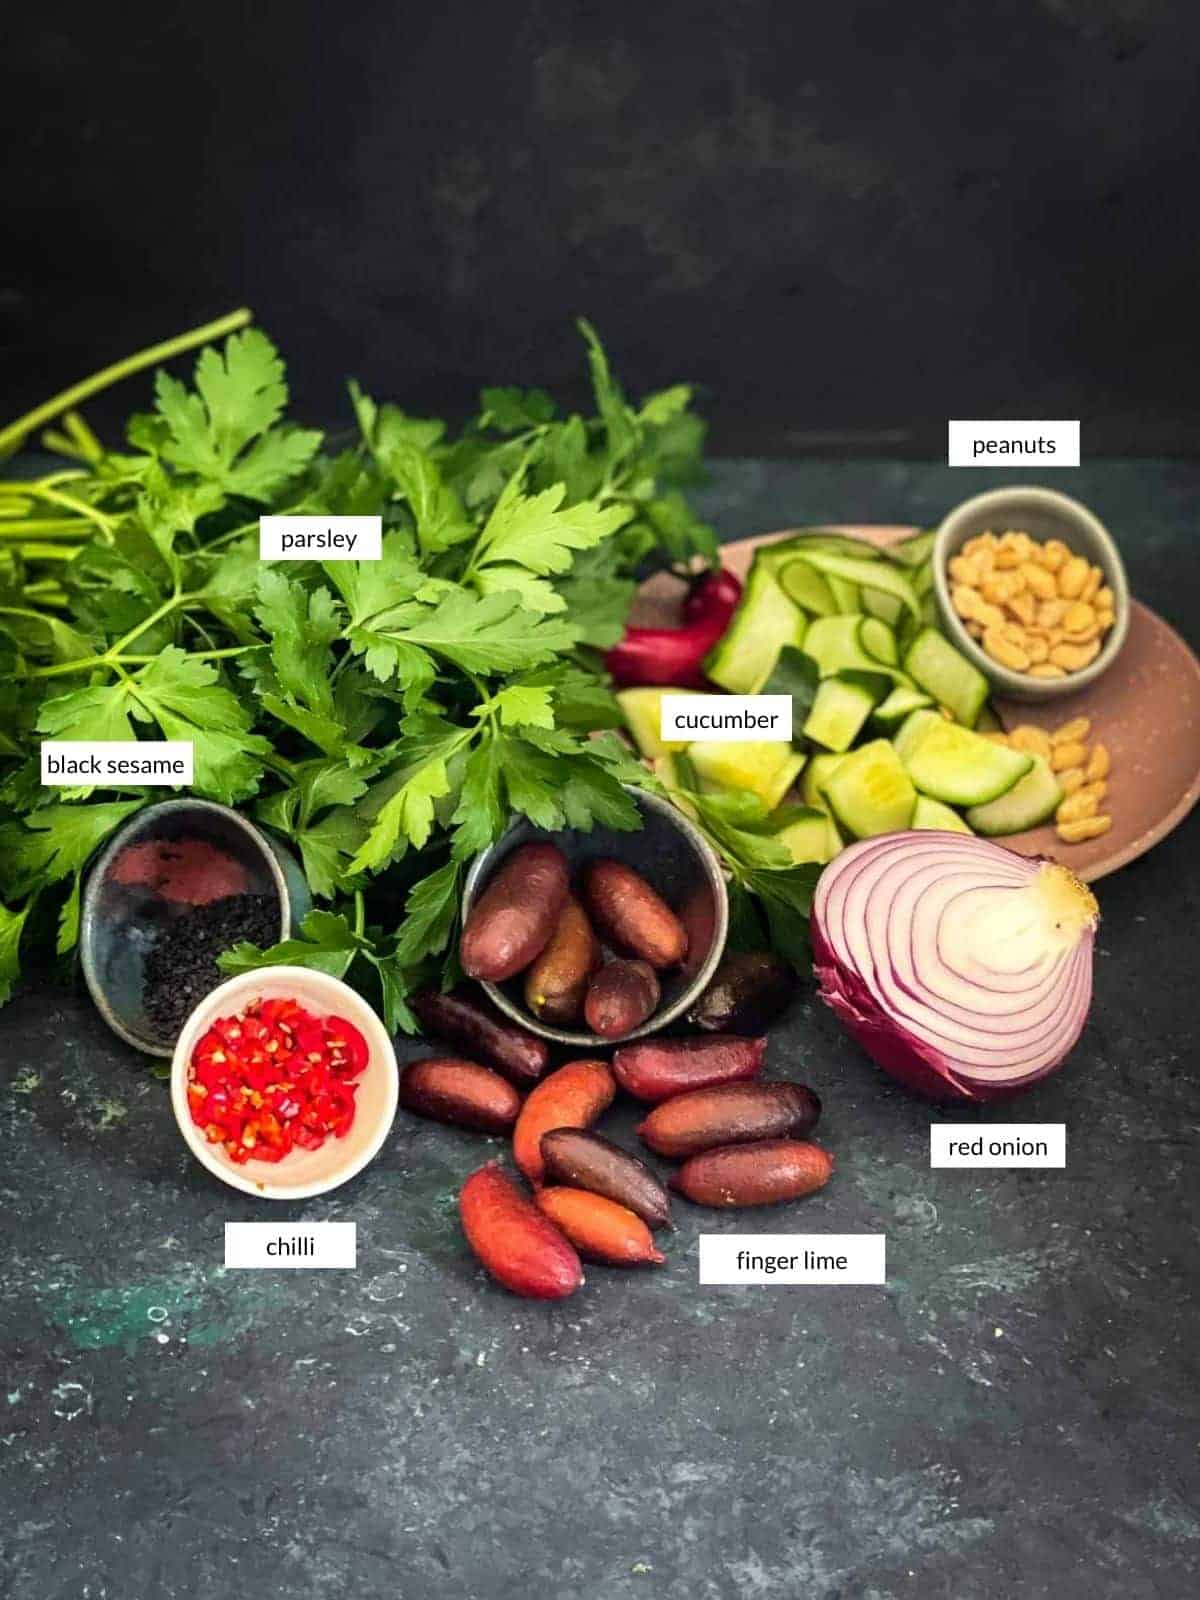 Individually labelled ingredients for Cucumber Finger Lime Salad